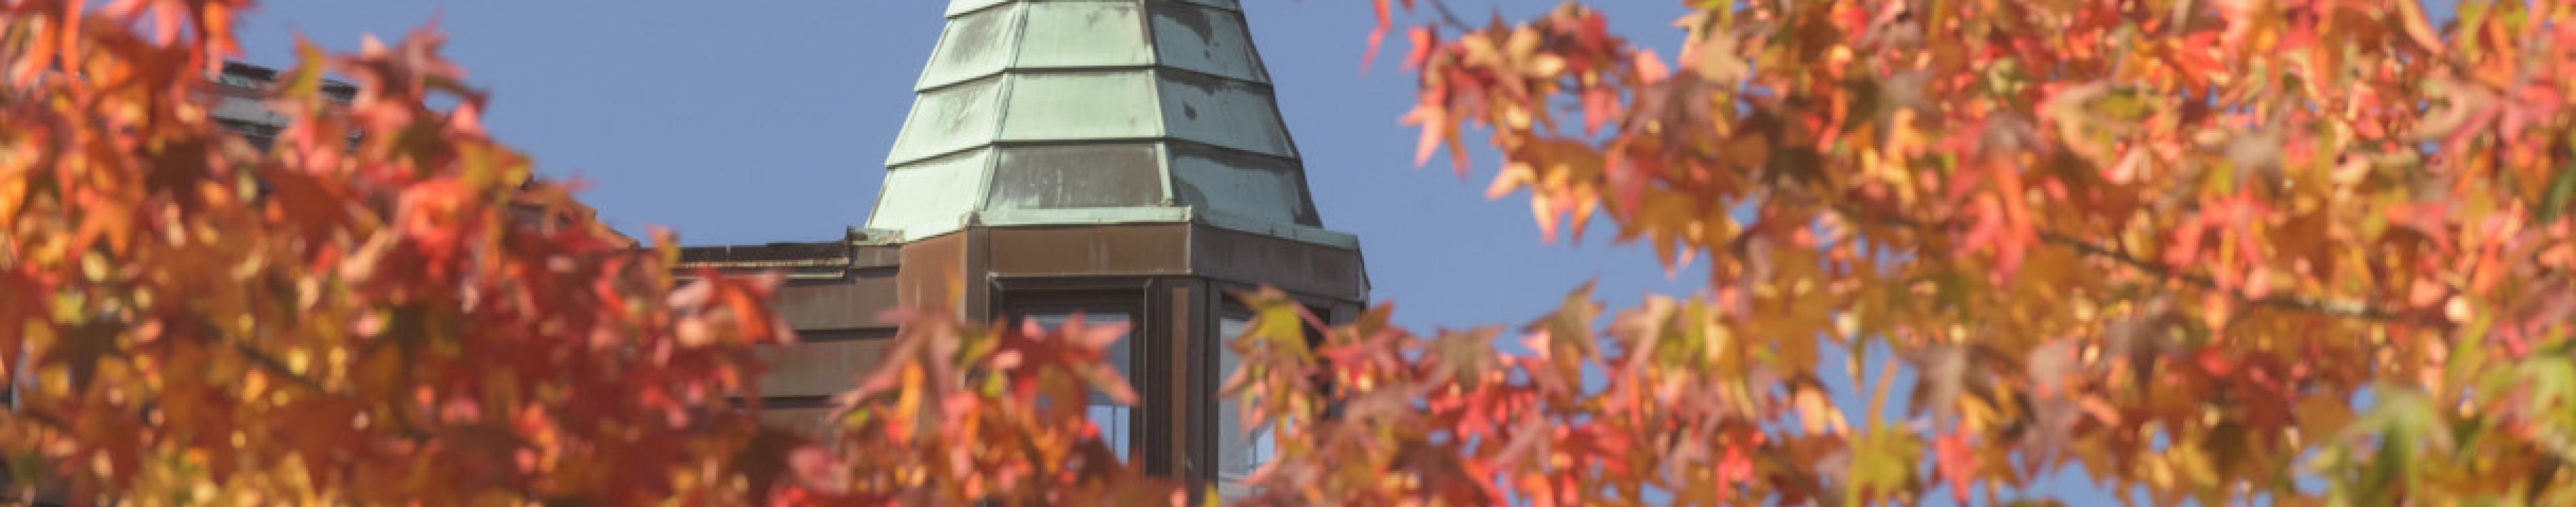 Fall trees and rooftop tower skyline view